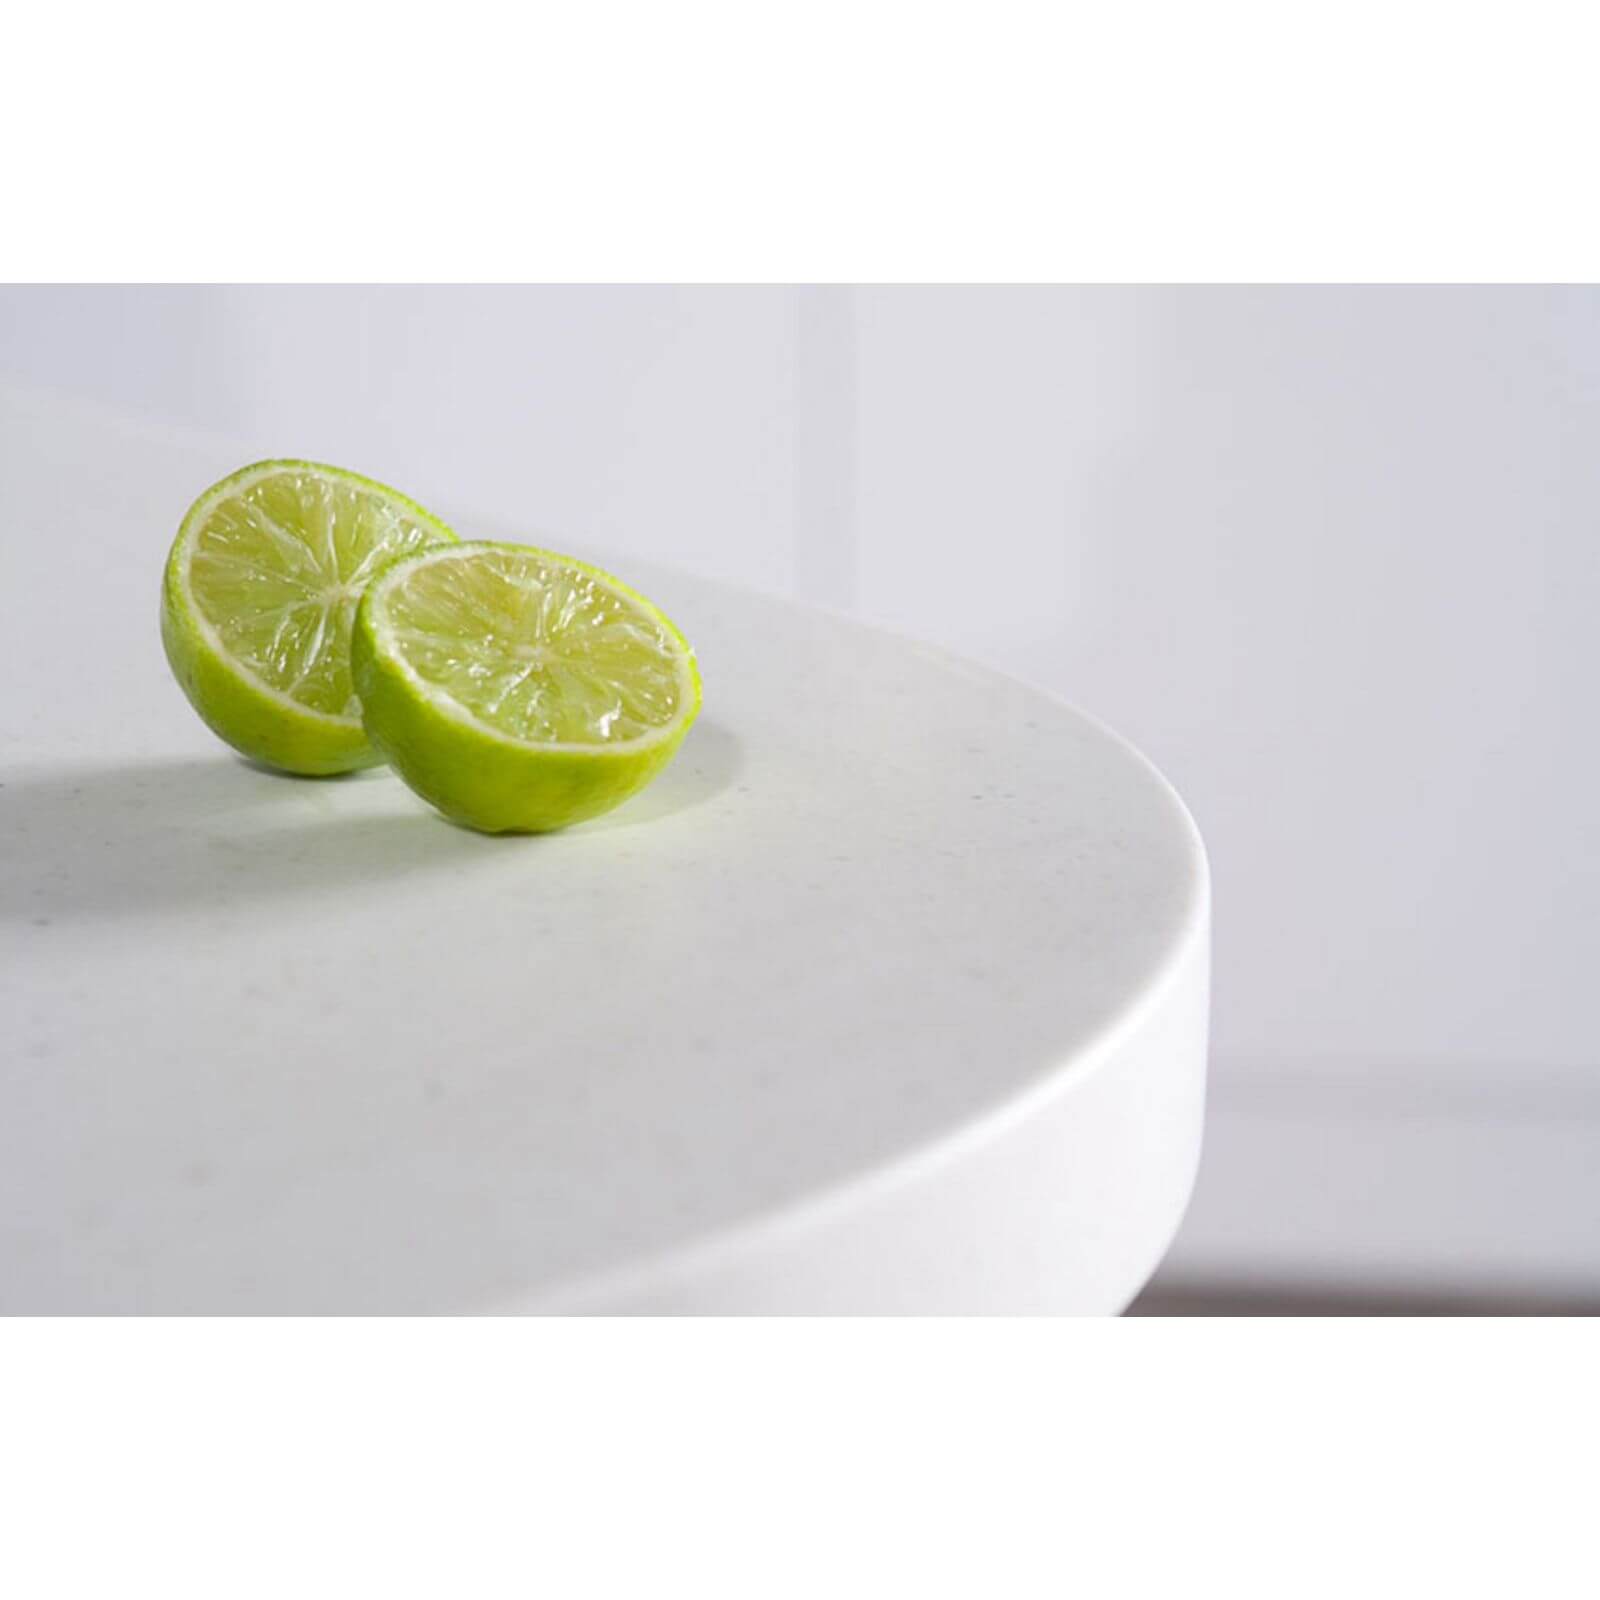 Maia Calcite Kitchen Sink Worktop - Acrylic 1.5 Duo Right Hand Bowl - 3600 x 650 x 28mm